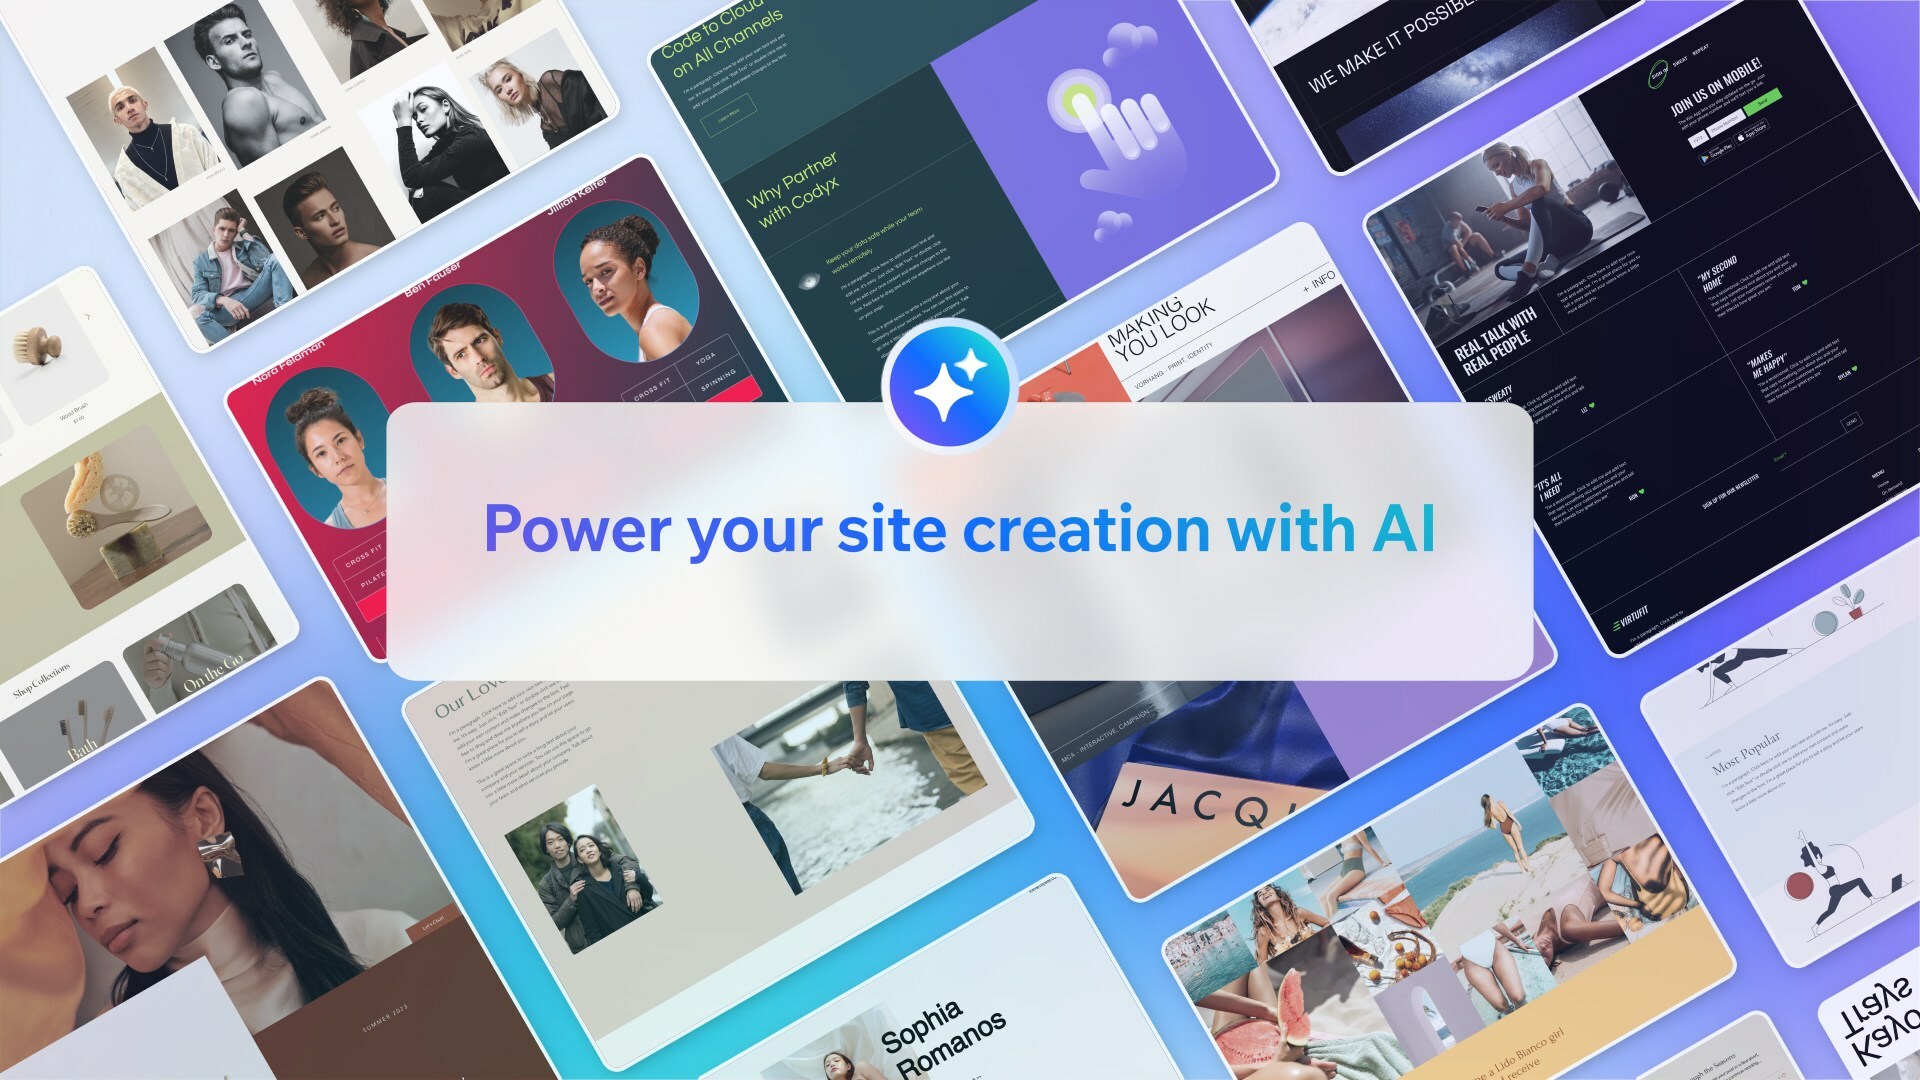 Wix AI - Powering Websites Without Code